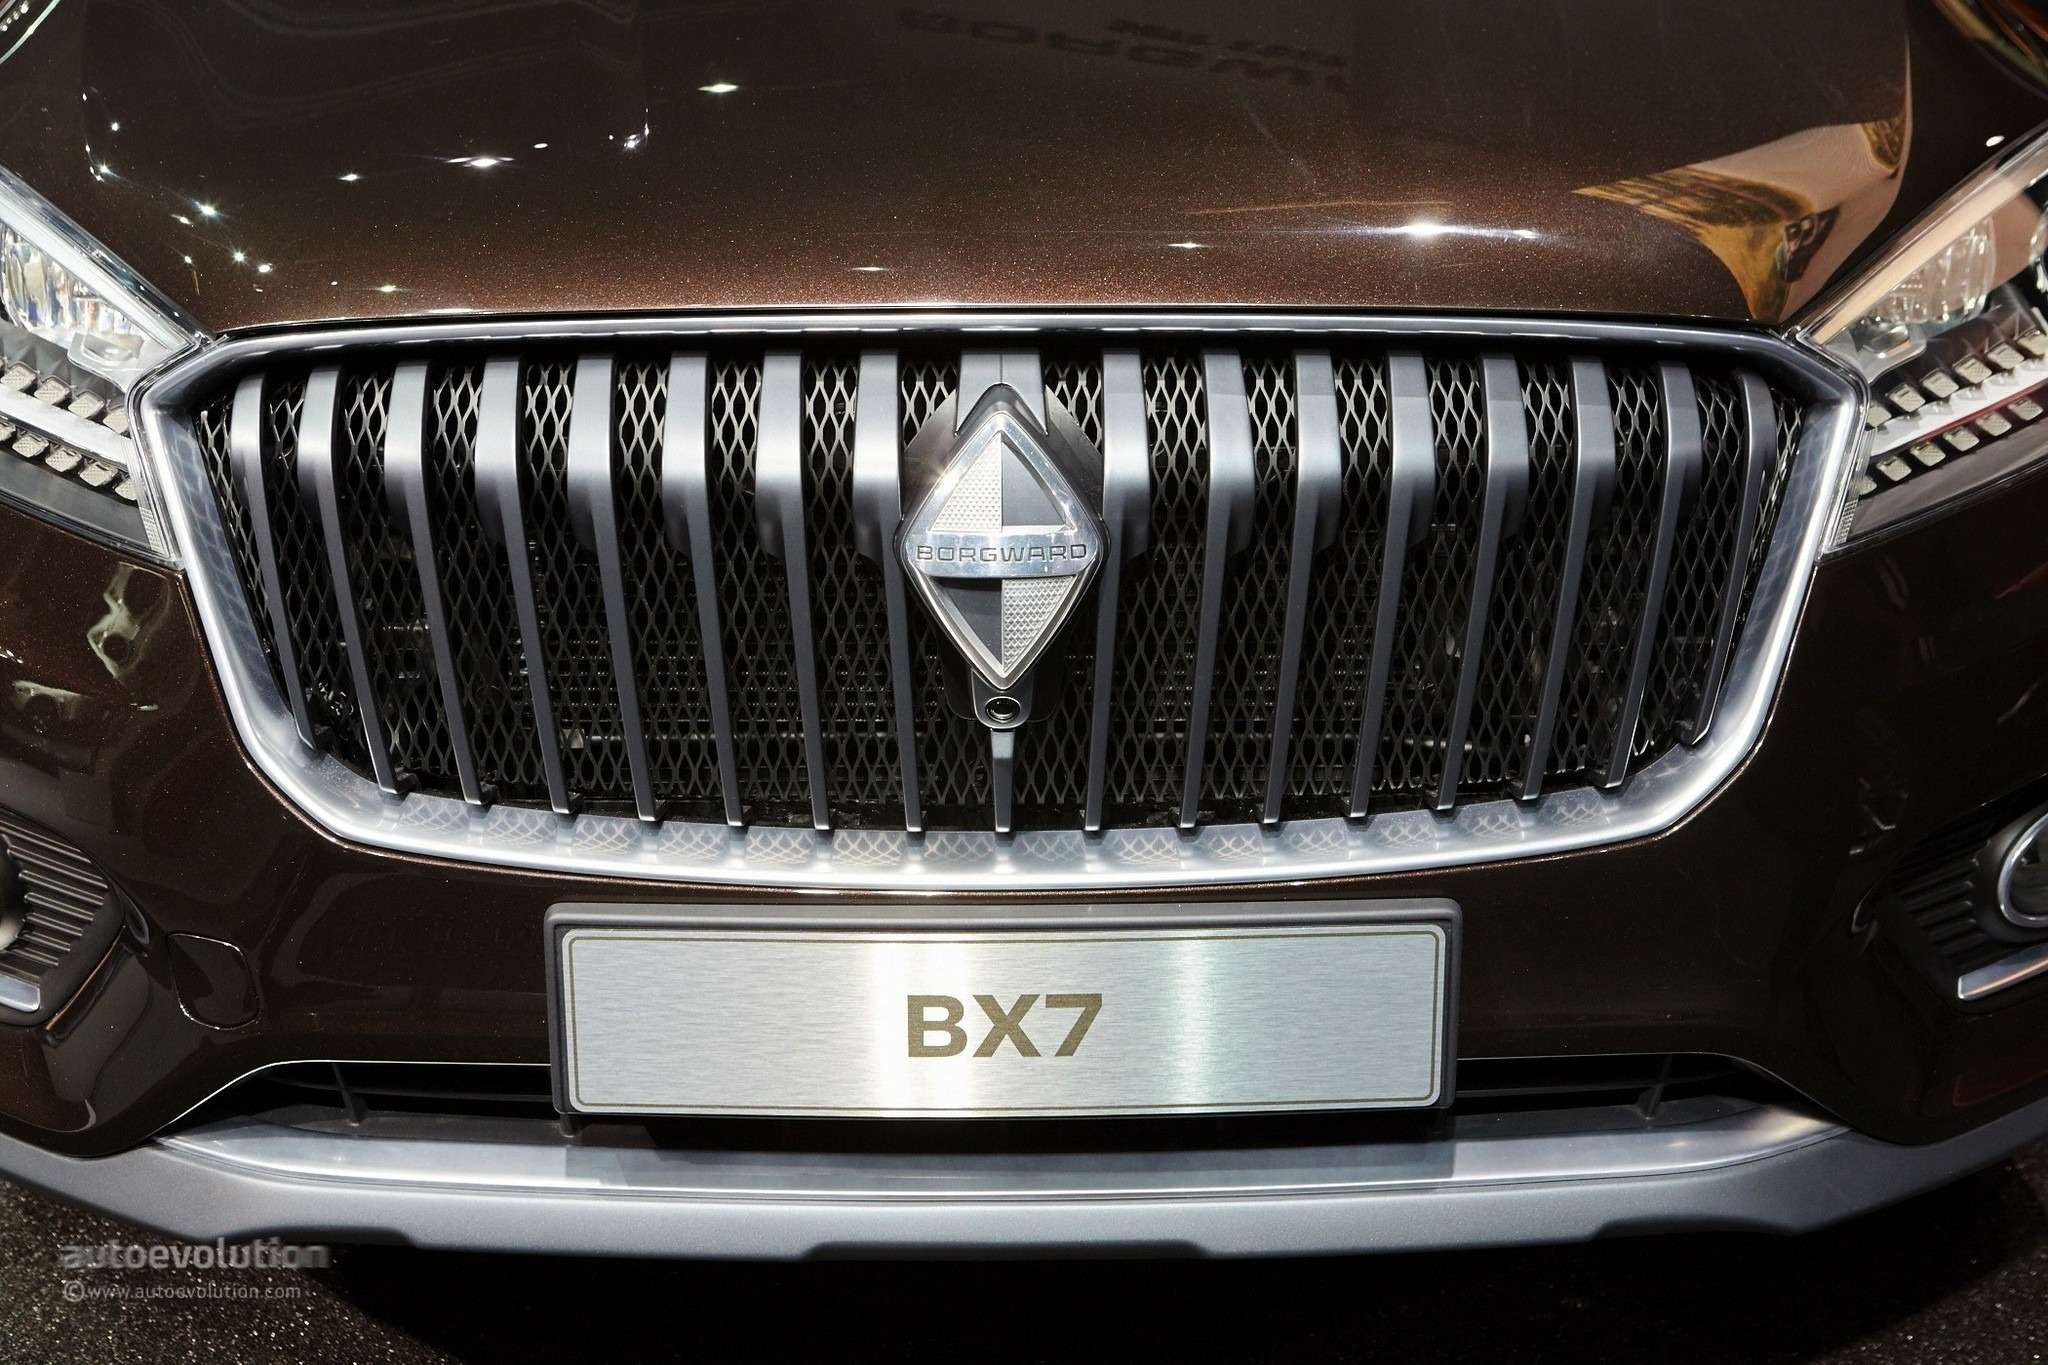 borgward-is-officially-back-with-its-bx7-suv-in-frankfurt-live-photos_4